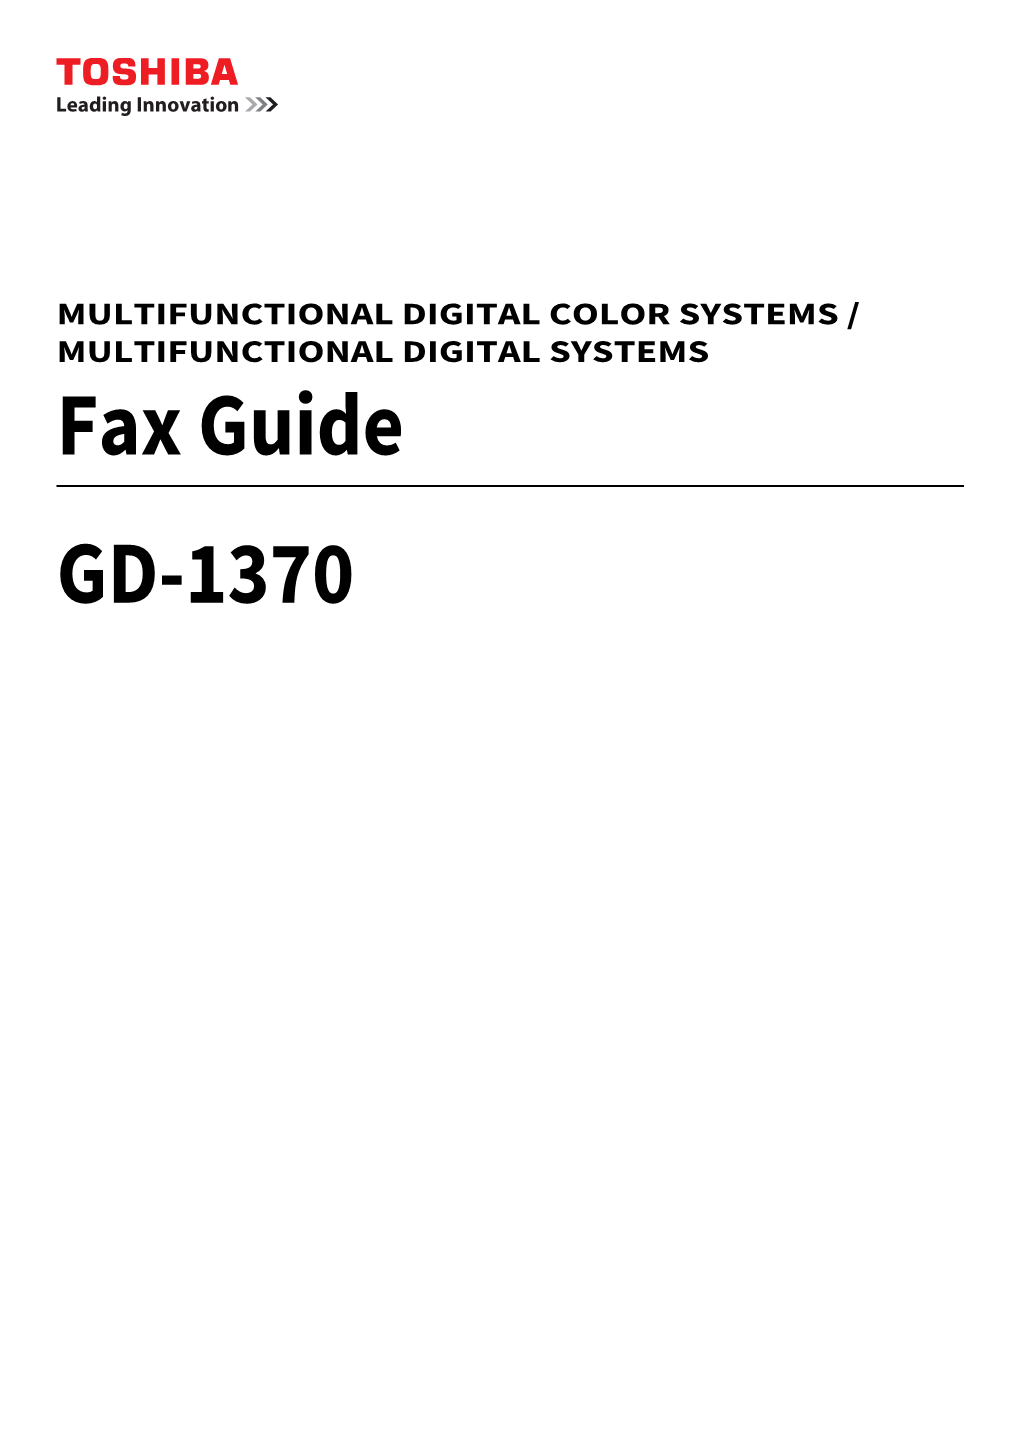 Fax Guide GD-1370